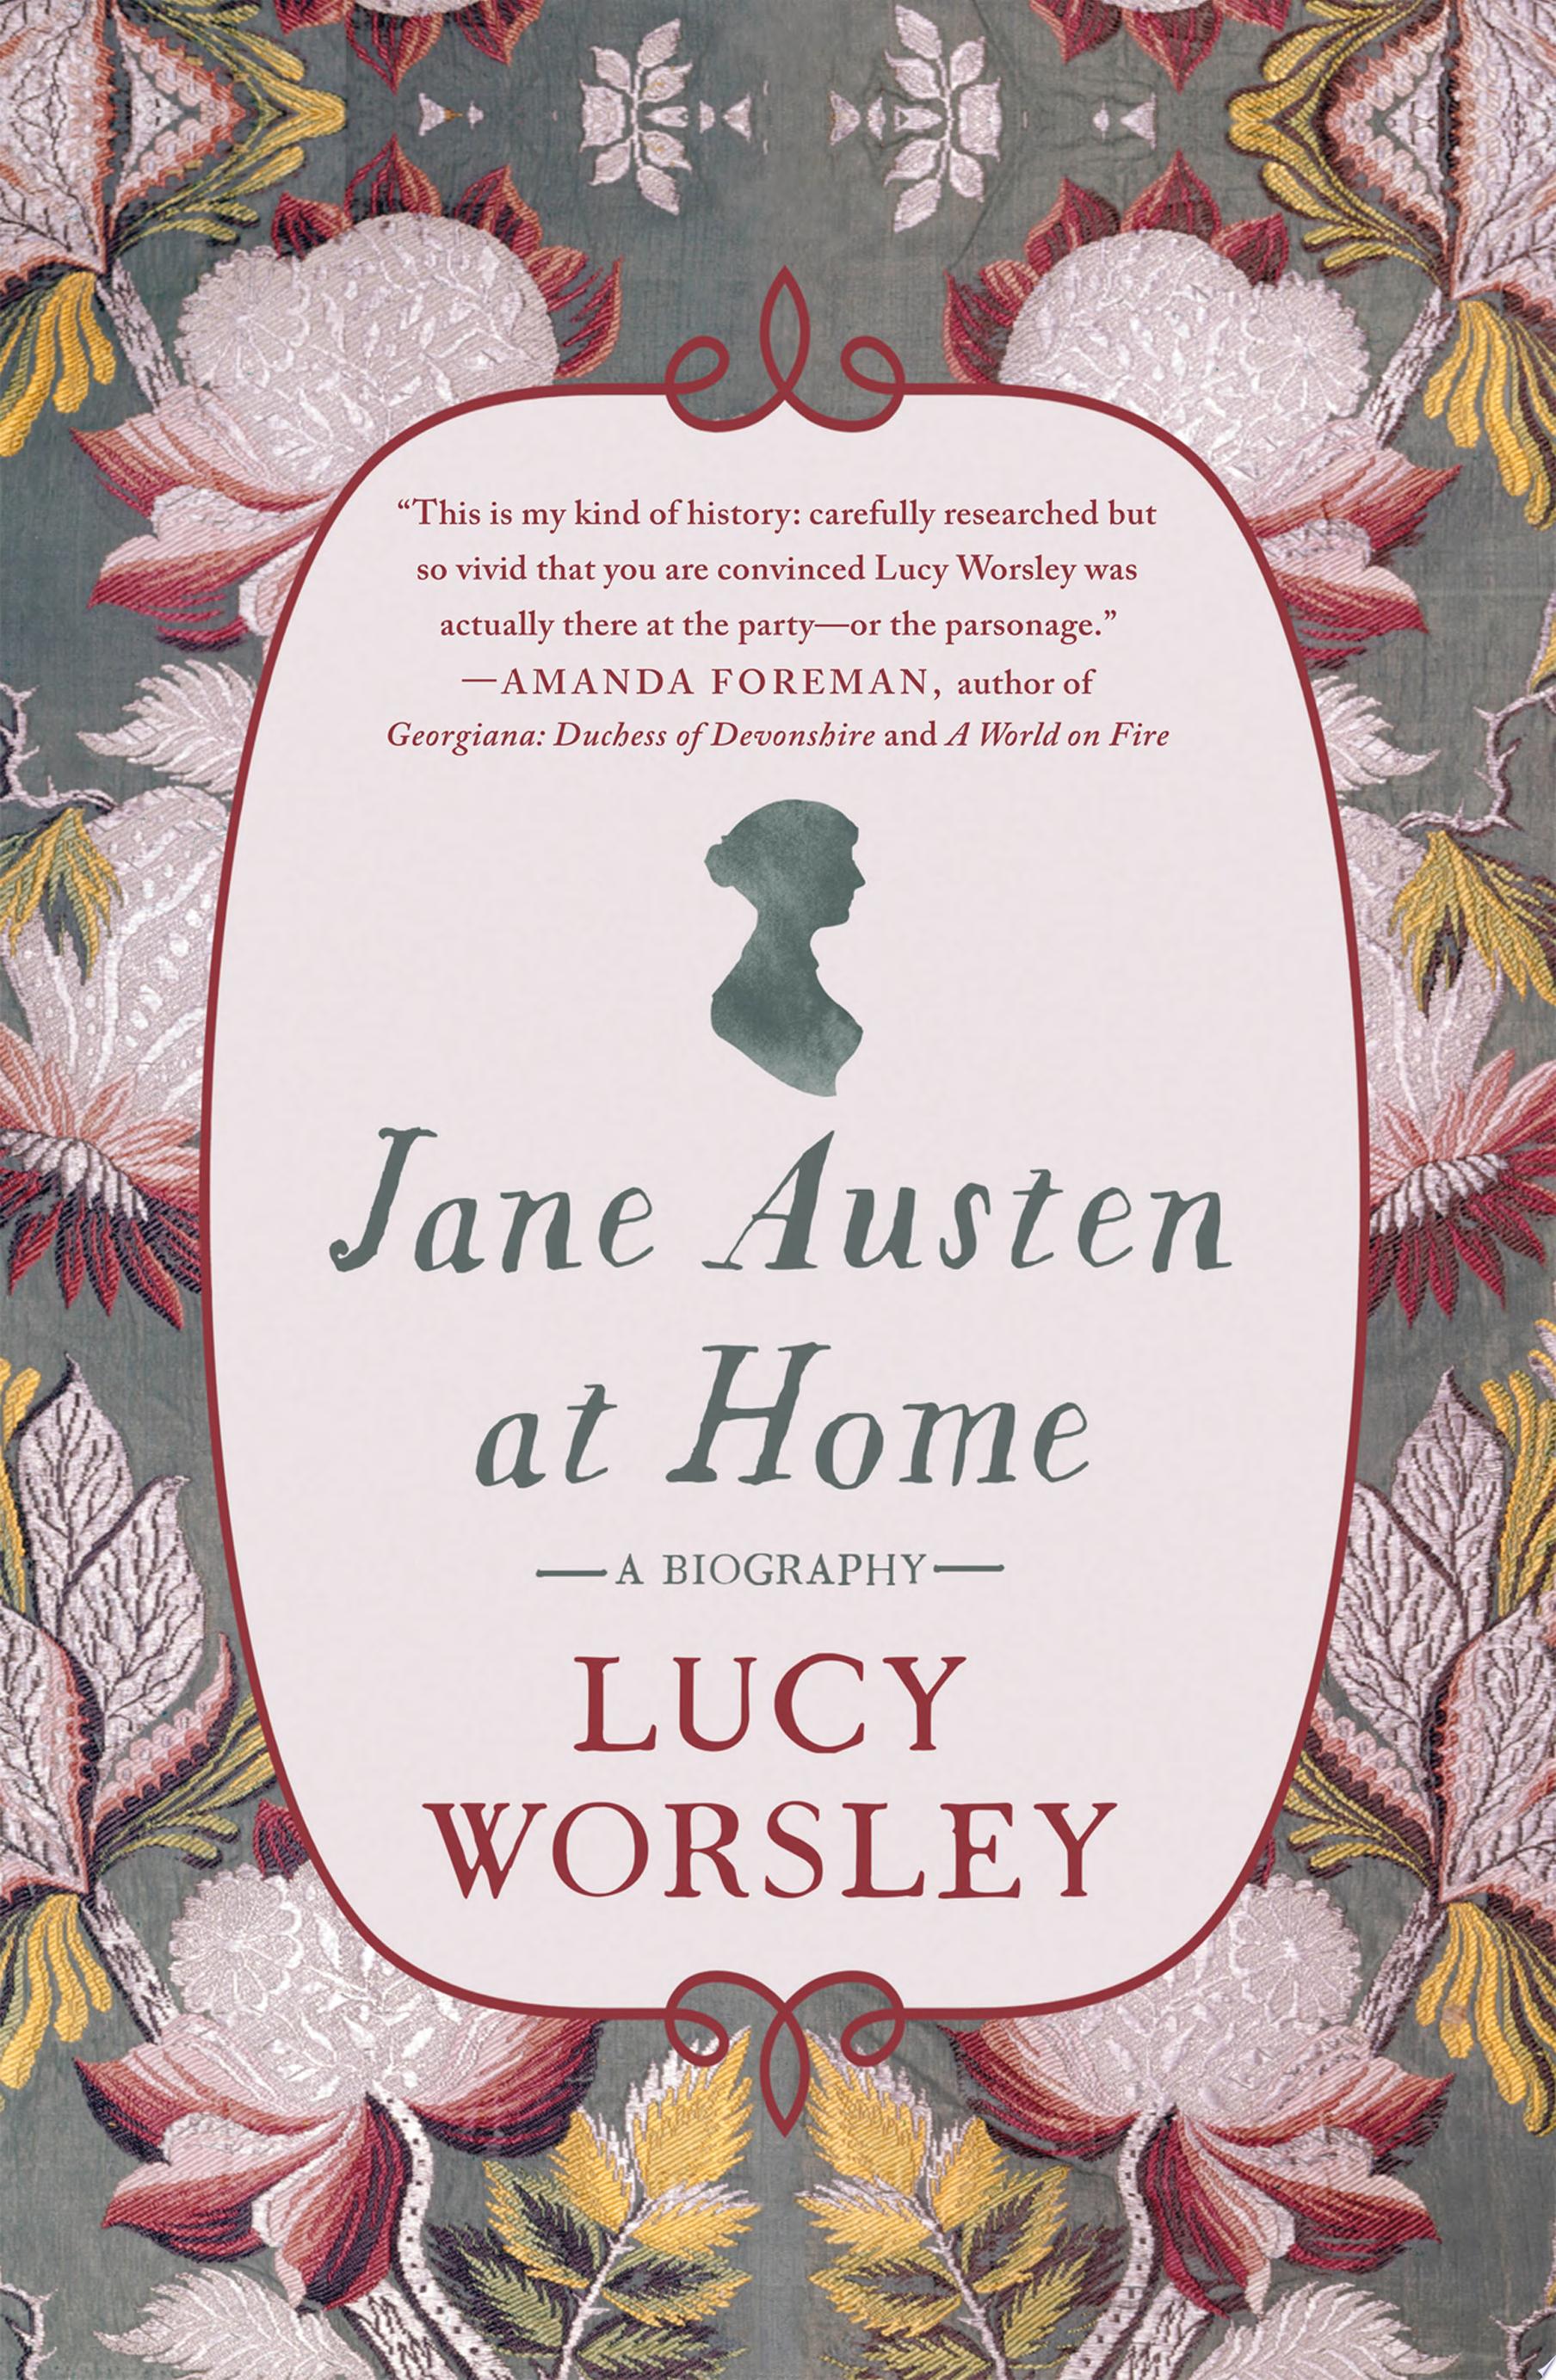 Image for "Jane Austen at Home"